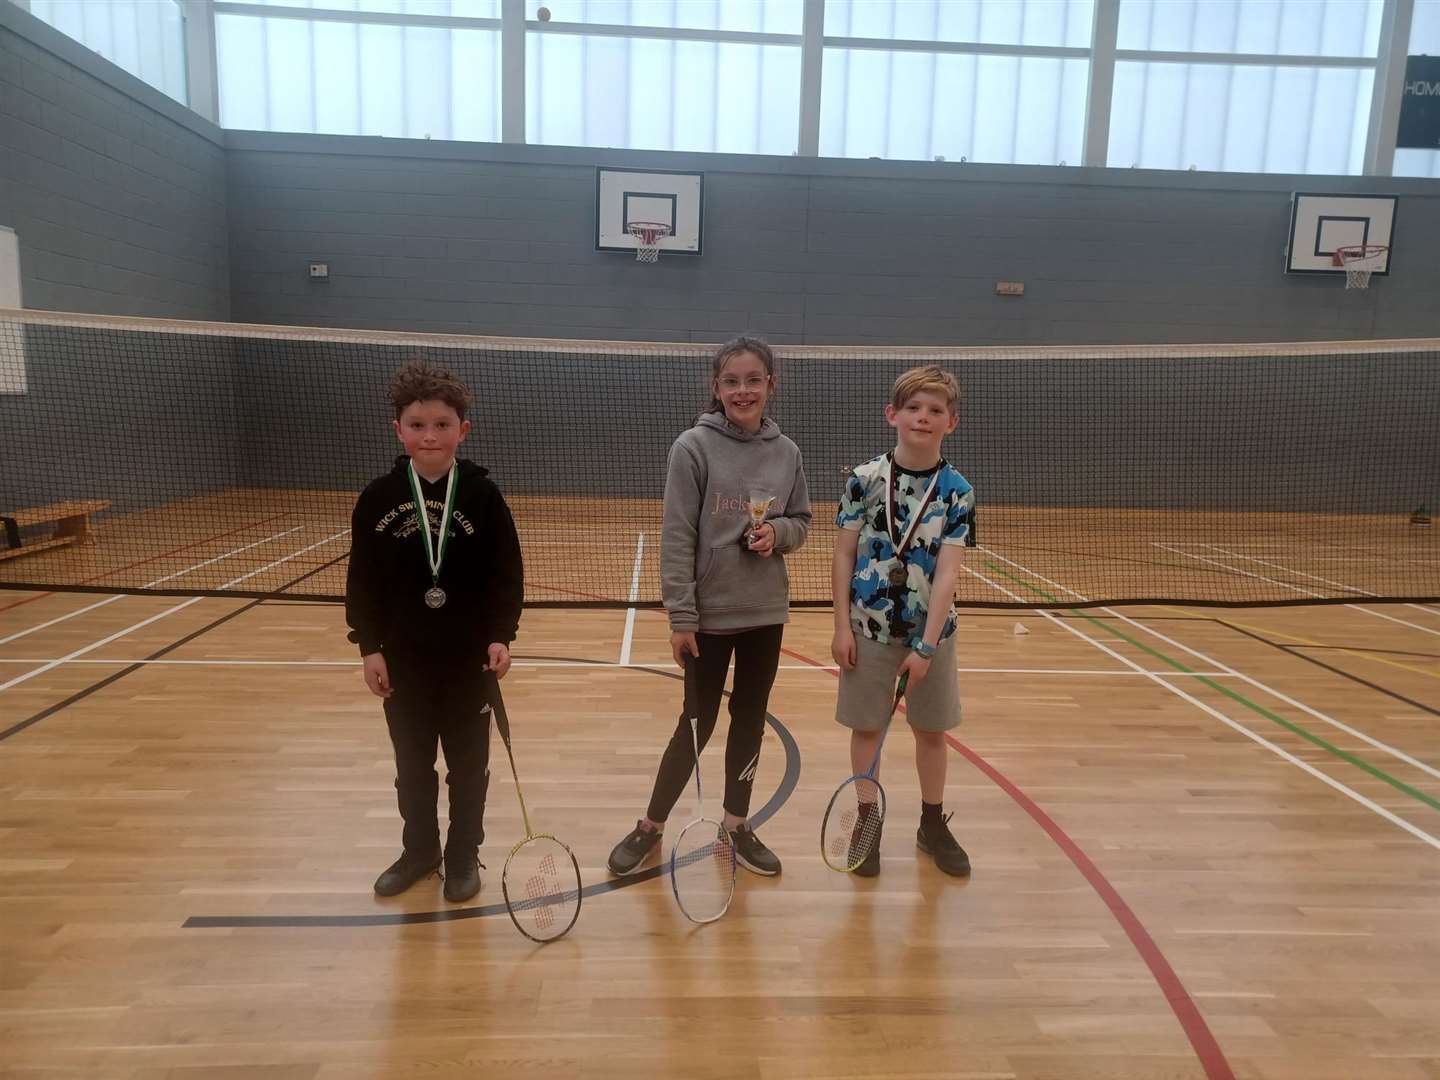 Badminton stars at the Easter camp.